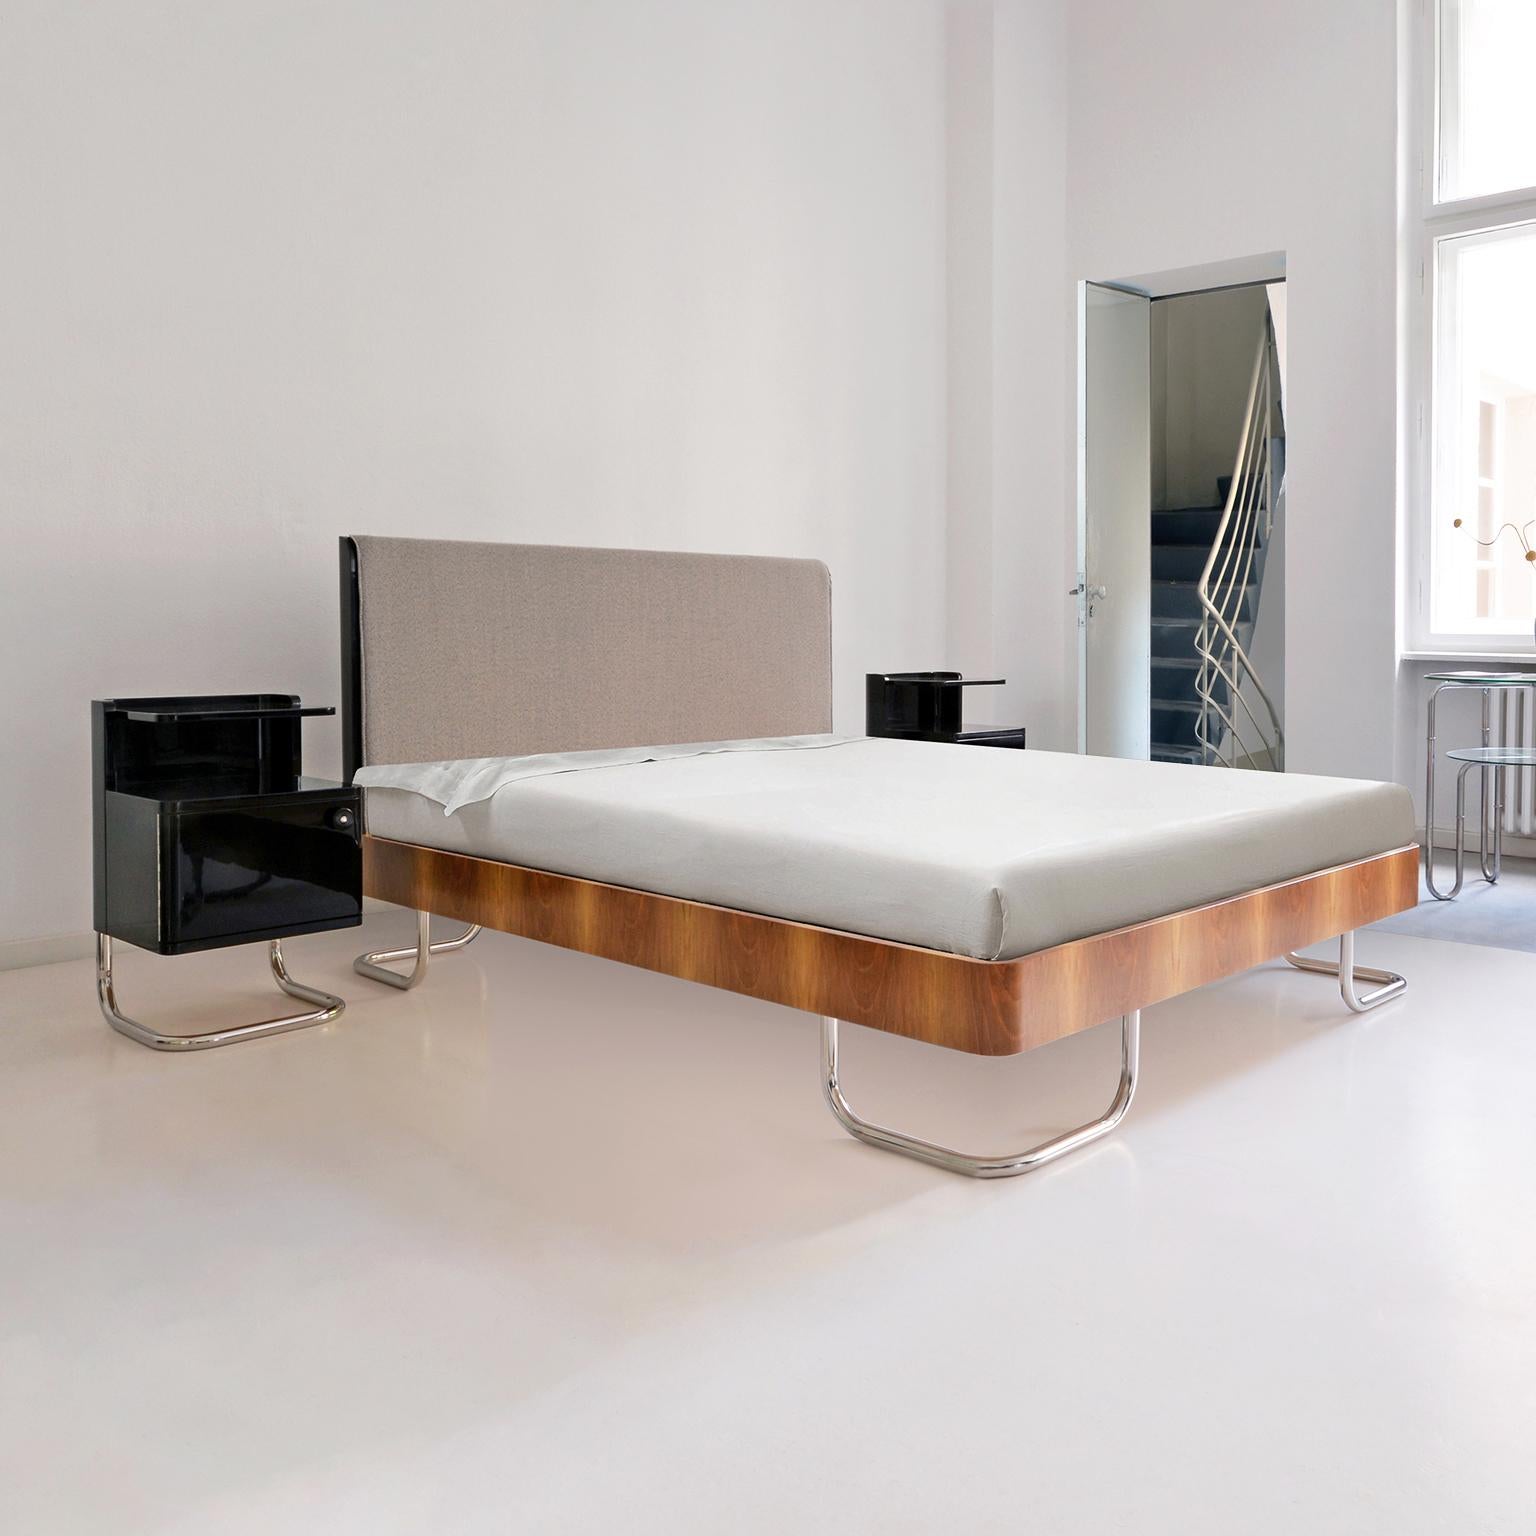 Modern contemporary customizable double bed with bedside cabinets in handcrafted wood, manufactured by GMD Berlin, Germany, 2018

Delivery time: 7-8 weeks.